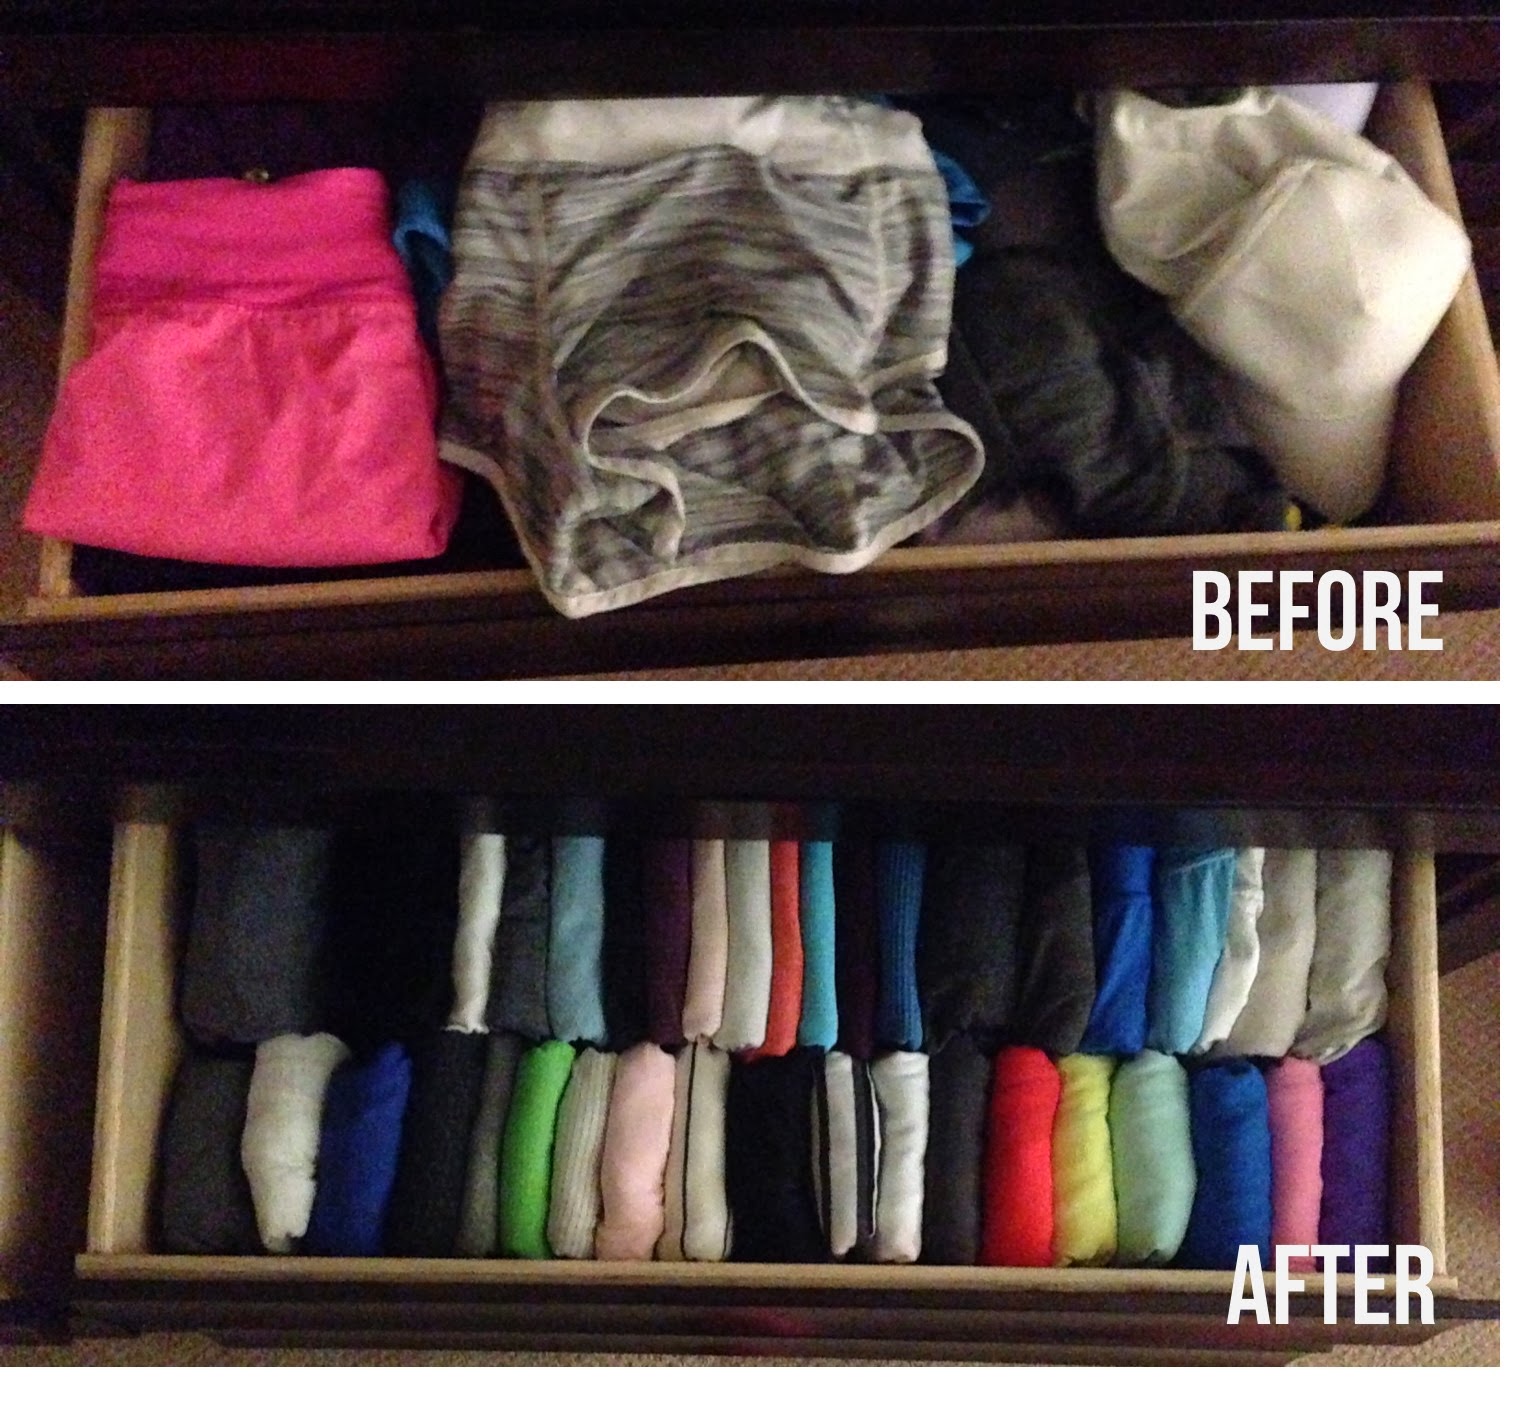 30 Minute How To Organize Workout Clothes for Fat Body